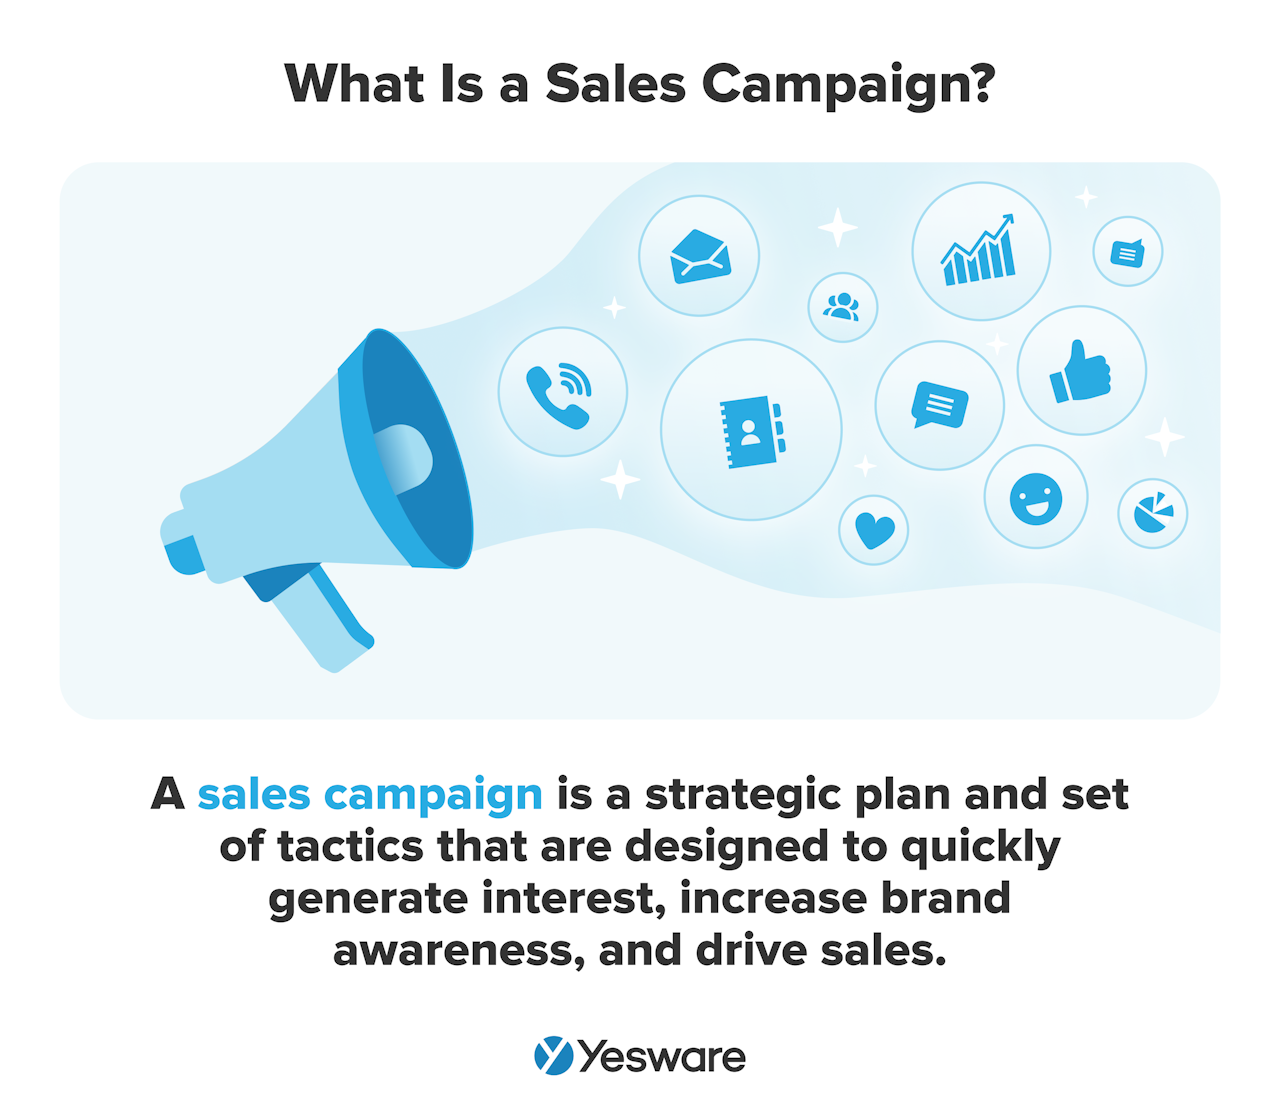 What is a sales campaign?